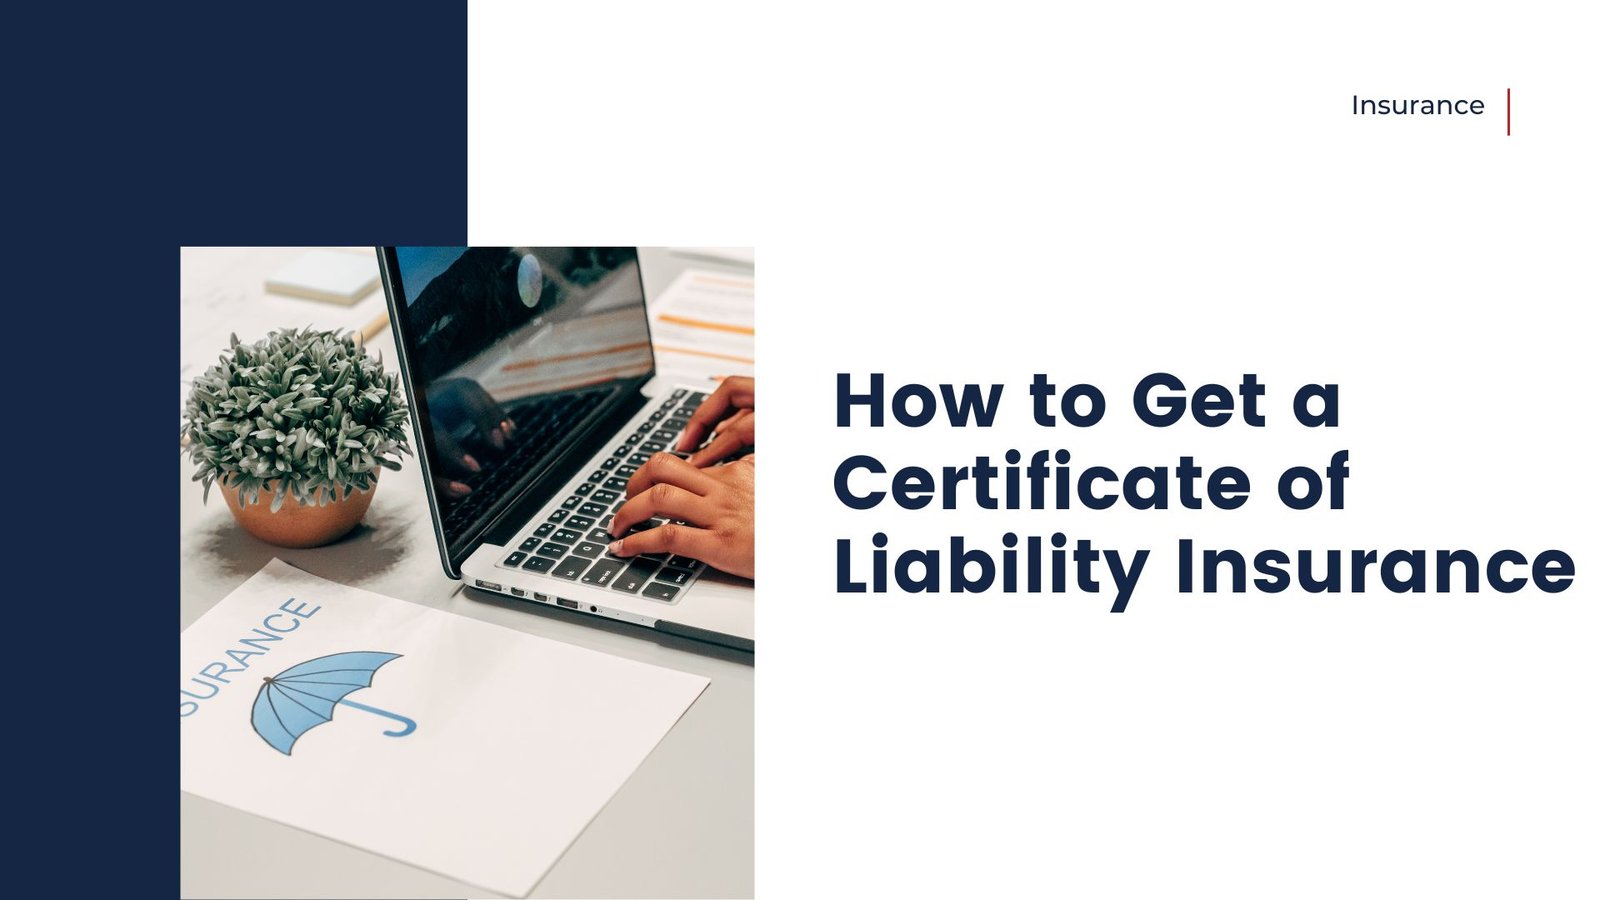 How to Get a Certificate of Liability Insurance